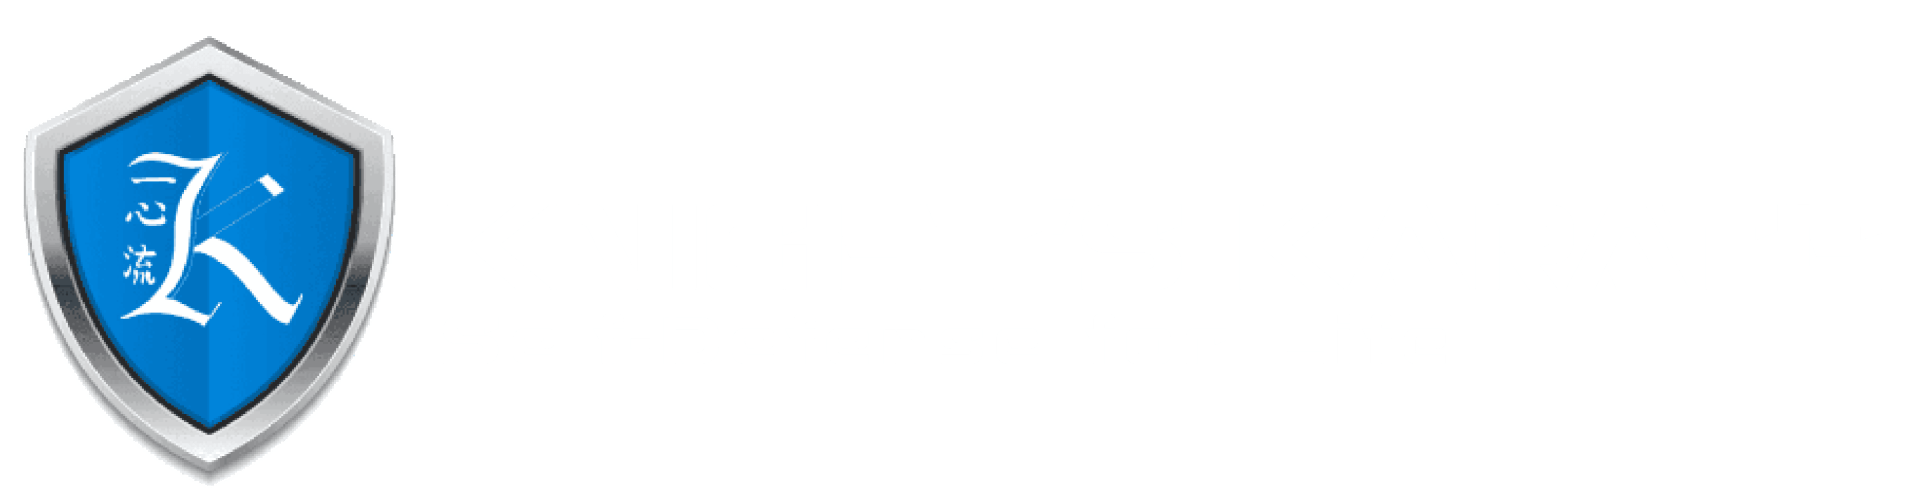 Knight's Karate Self- Defense for Life